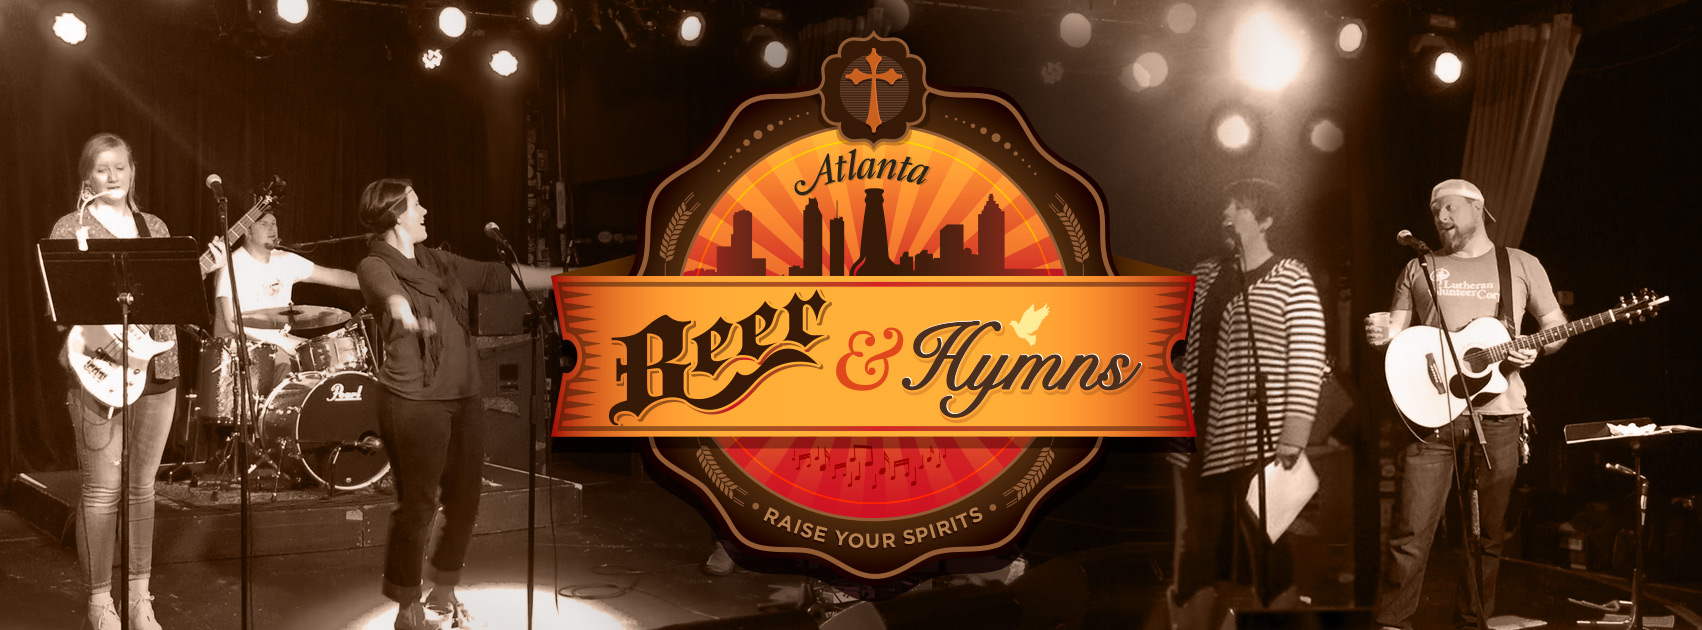 ATL beer and hymns